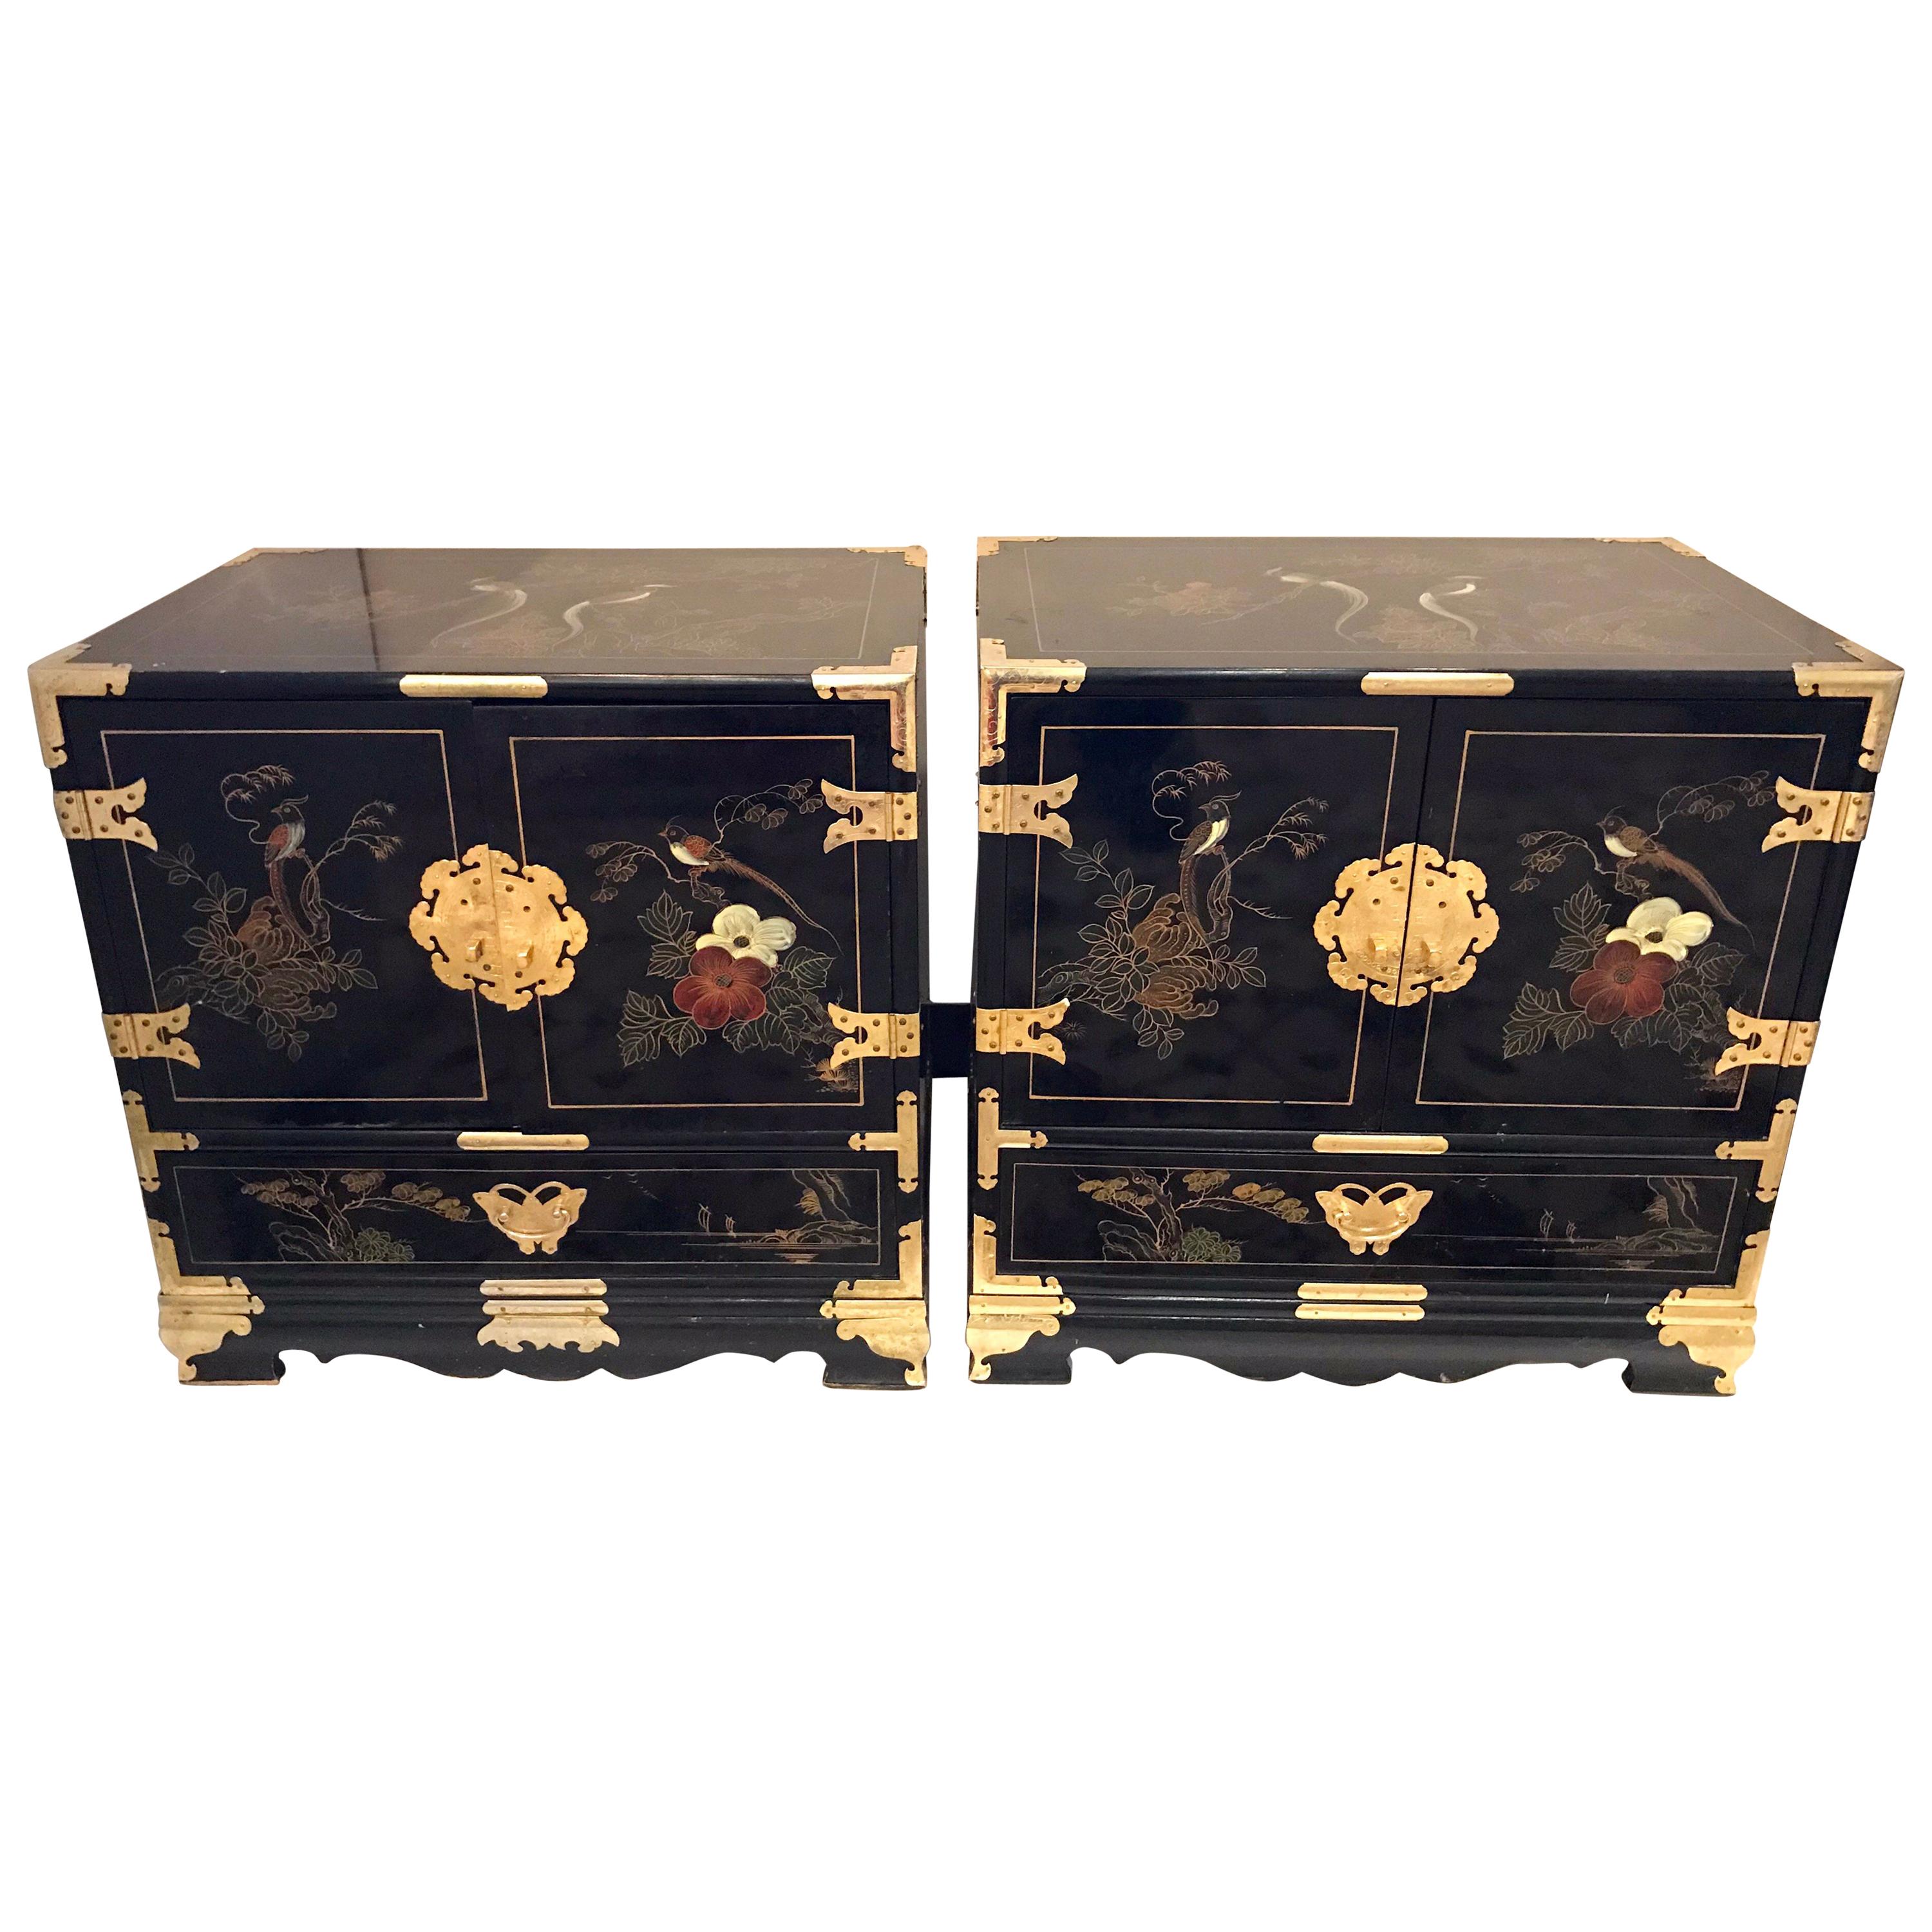 Pair of Midcentury Chinese Chinoiserie Black Lacquer Nightstands